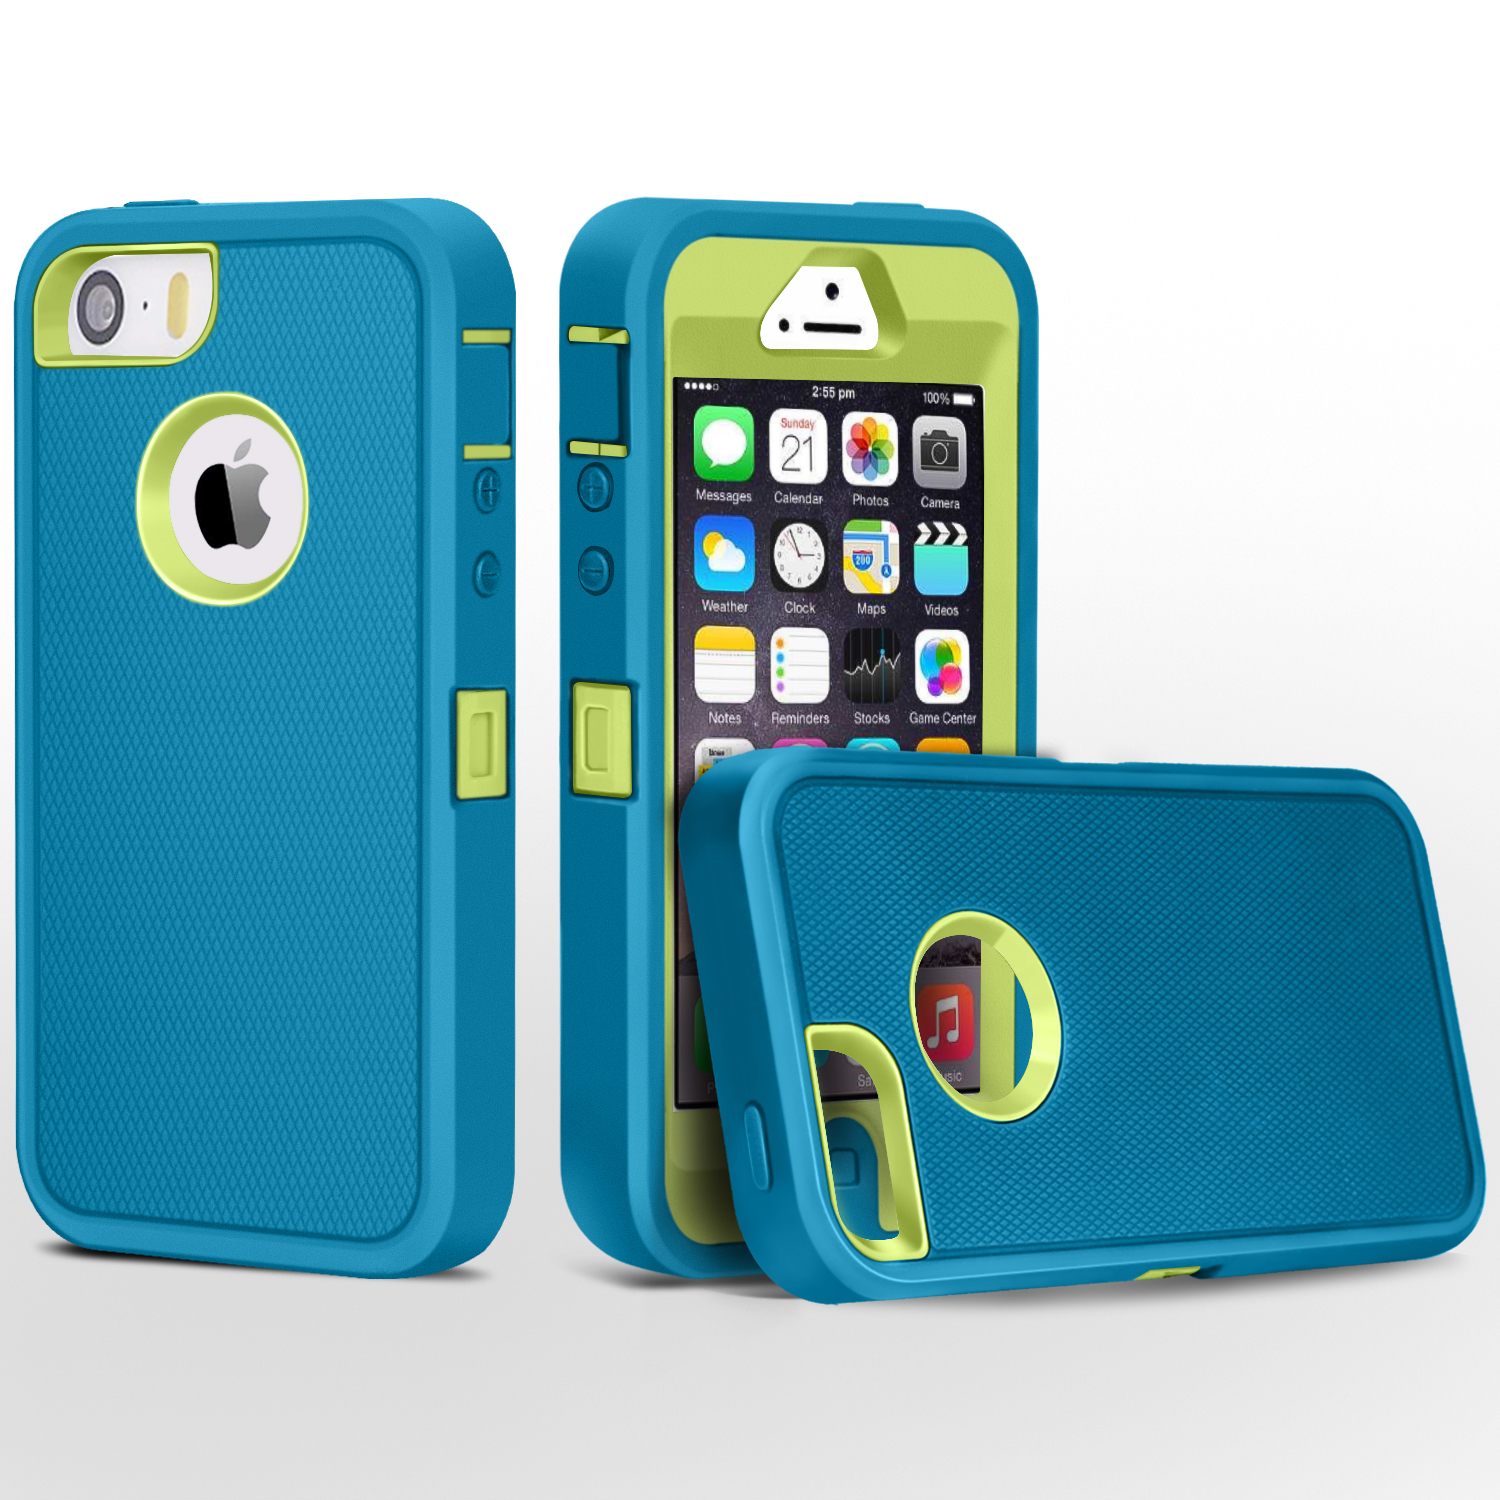 iPhone 5 Case, FogeekHeavy Duty PC + TPU Combo Protective Defender Body Armor Case for iPhone 5 & iPhone 5S(Light Blue/Green) 